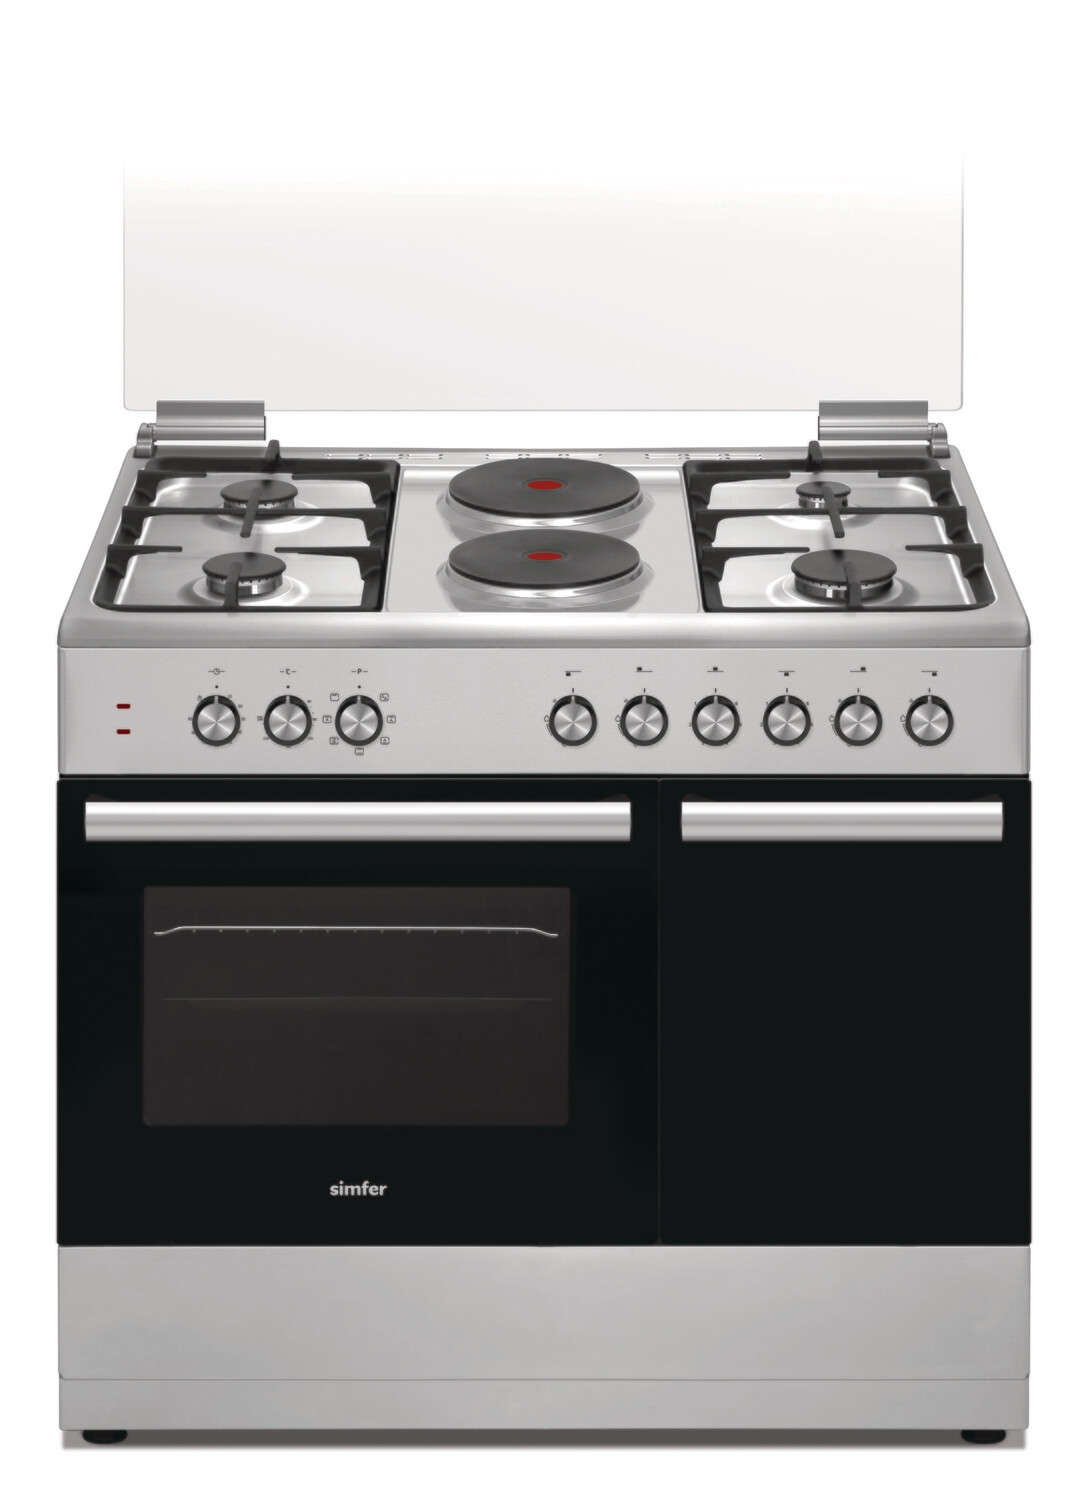 Simfer 6312NEI Cooker 3 Gas + 1 Electric - Stainless Steel + FREE Simfer Apron &amp; Mitten Set